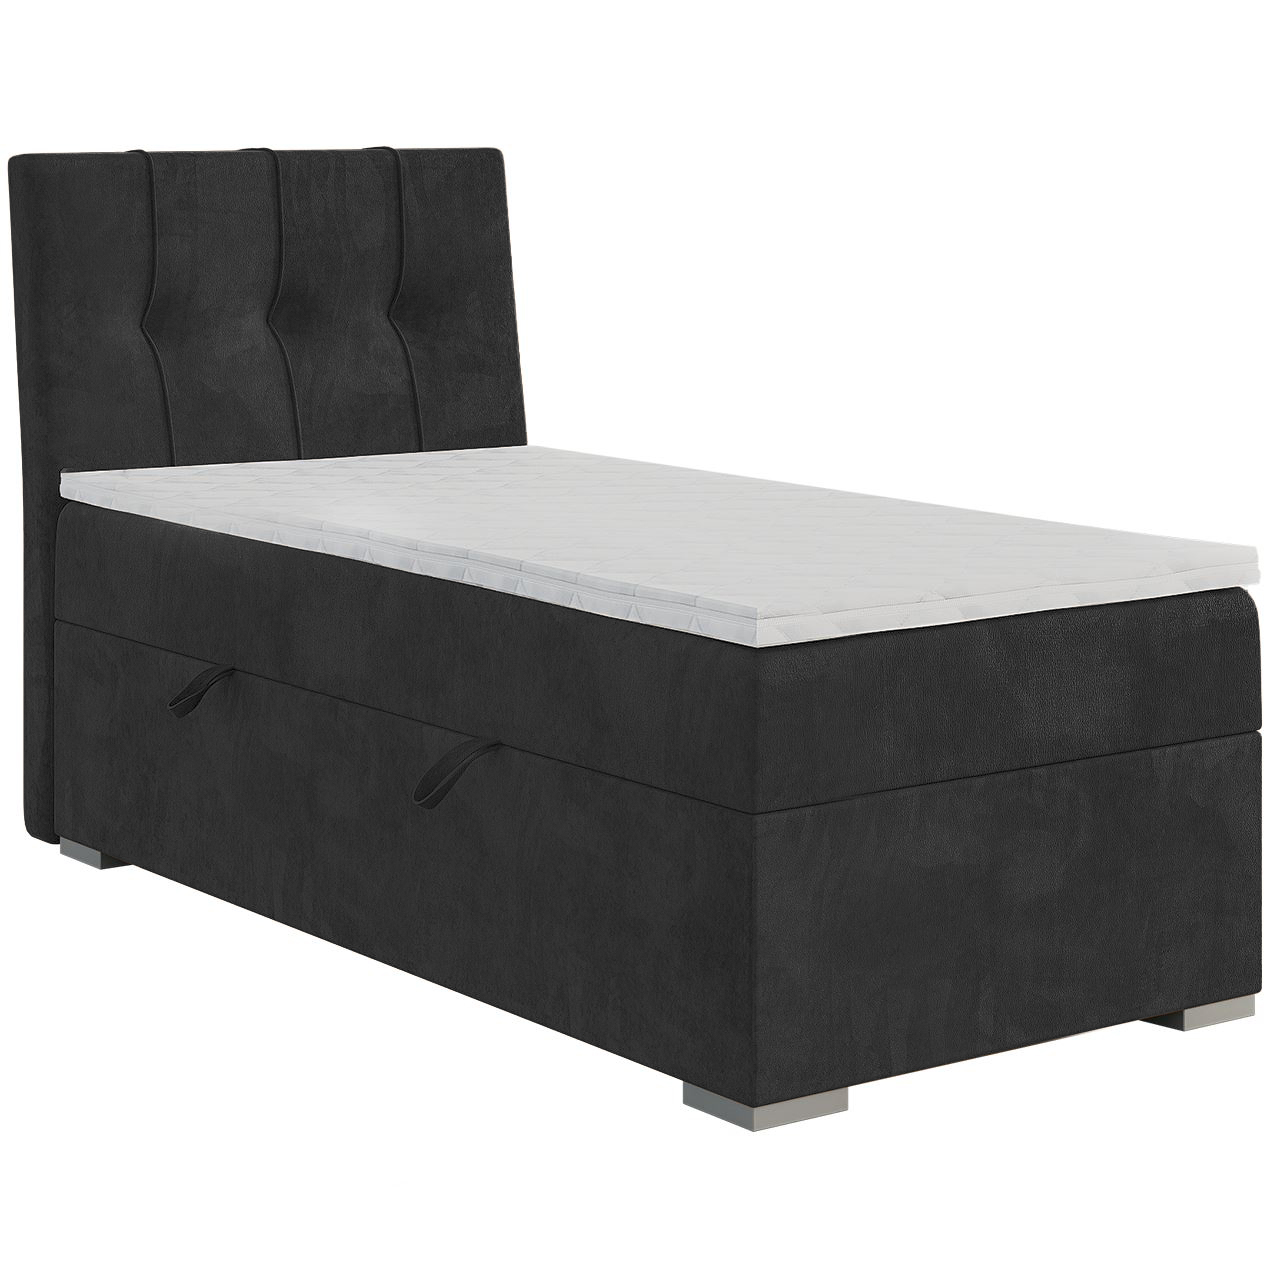 Upholstered bed DANO 90x200 right riviera 97